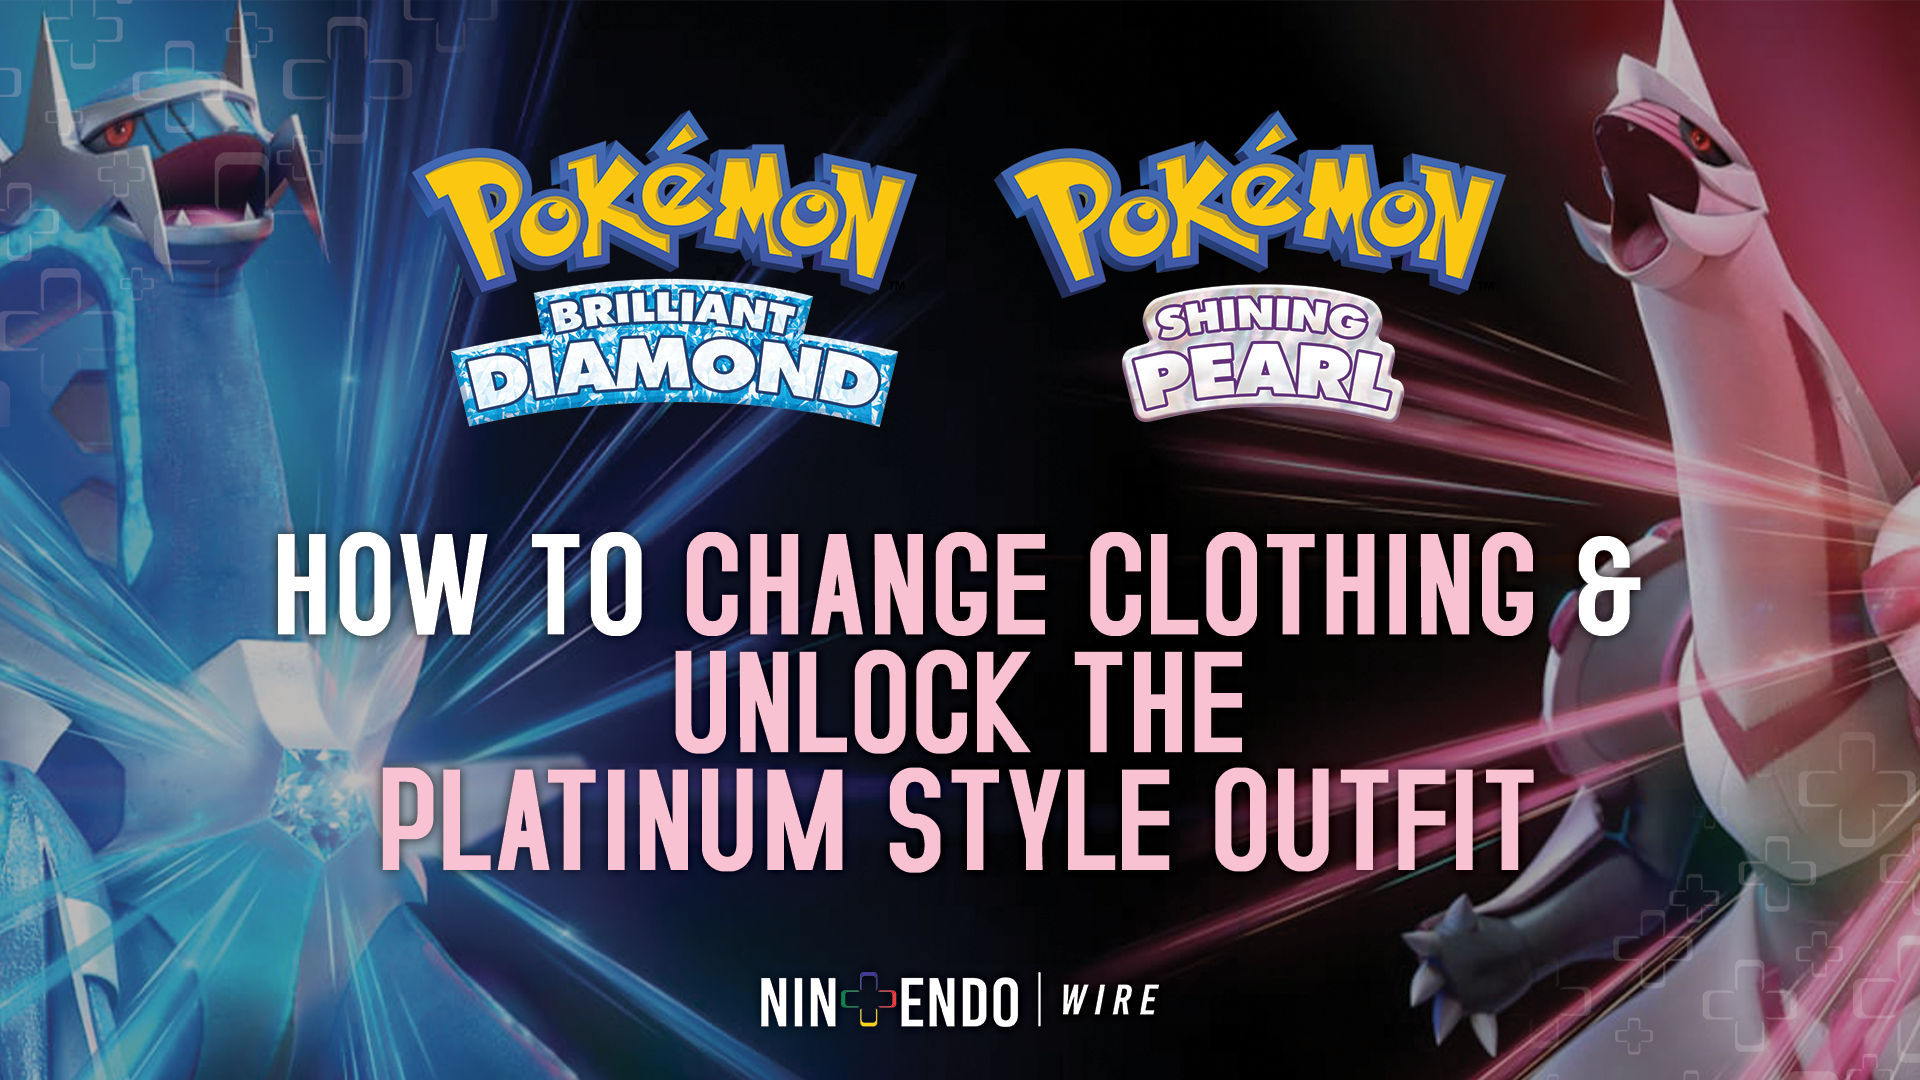 How to Change Clothing and Unlock Platinum Outfit in Pokémon BDSP